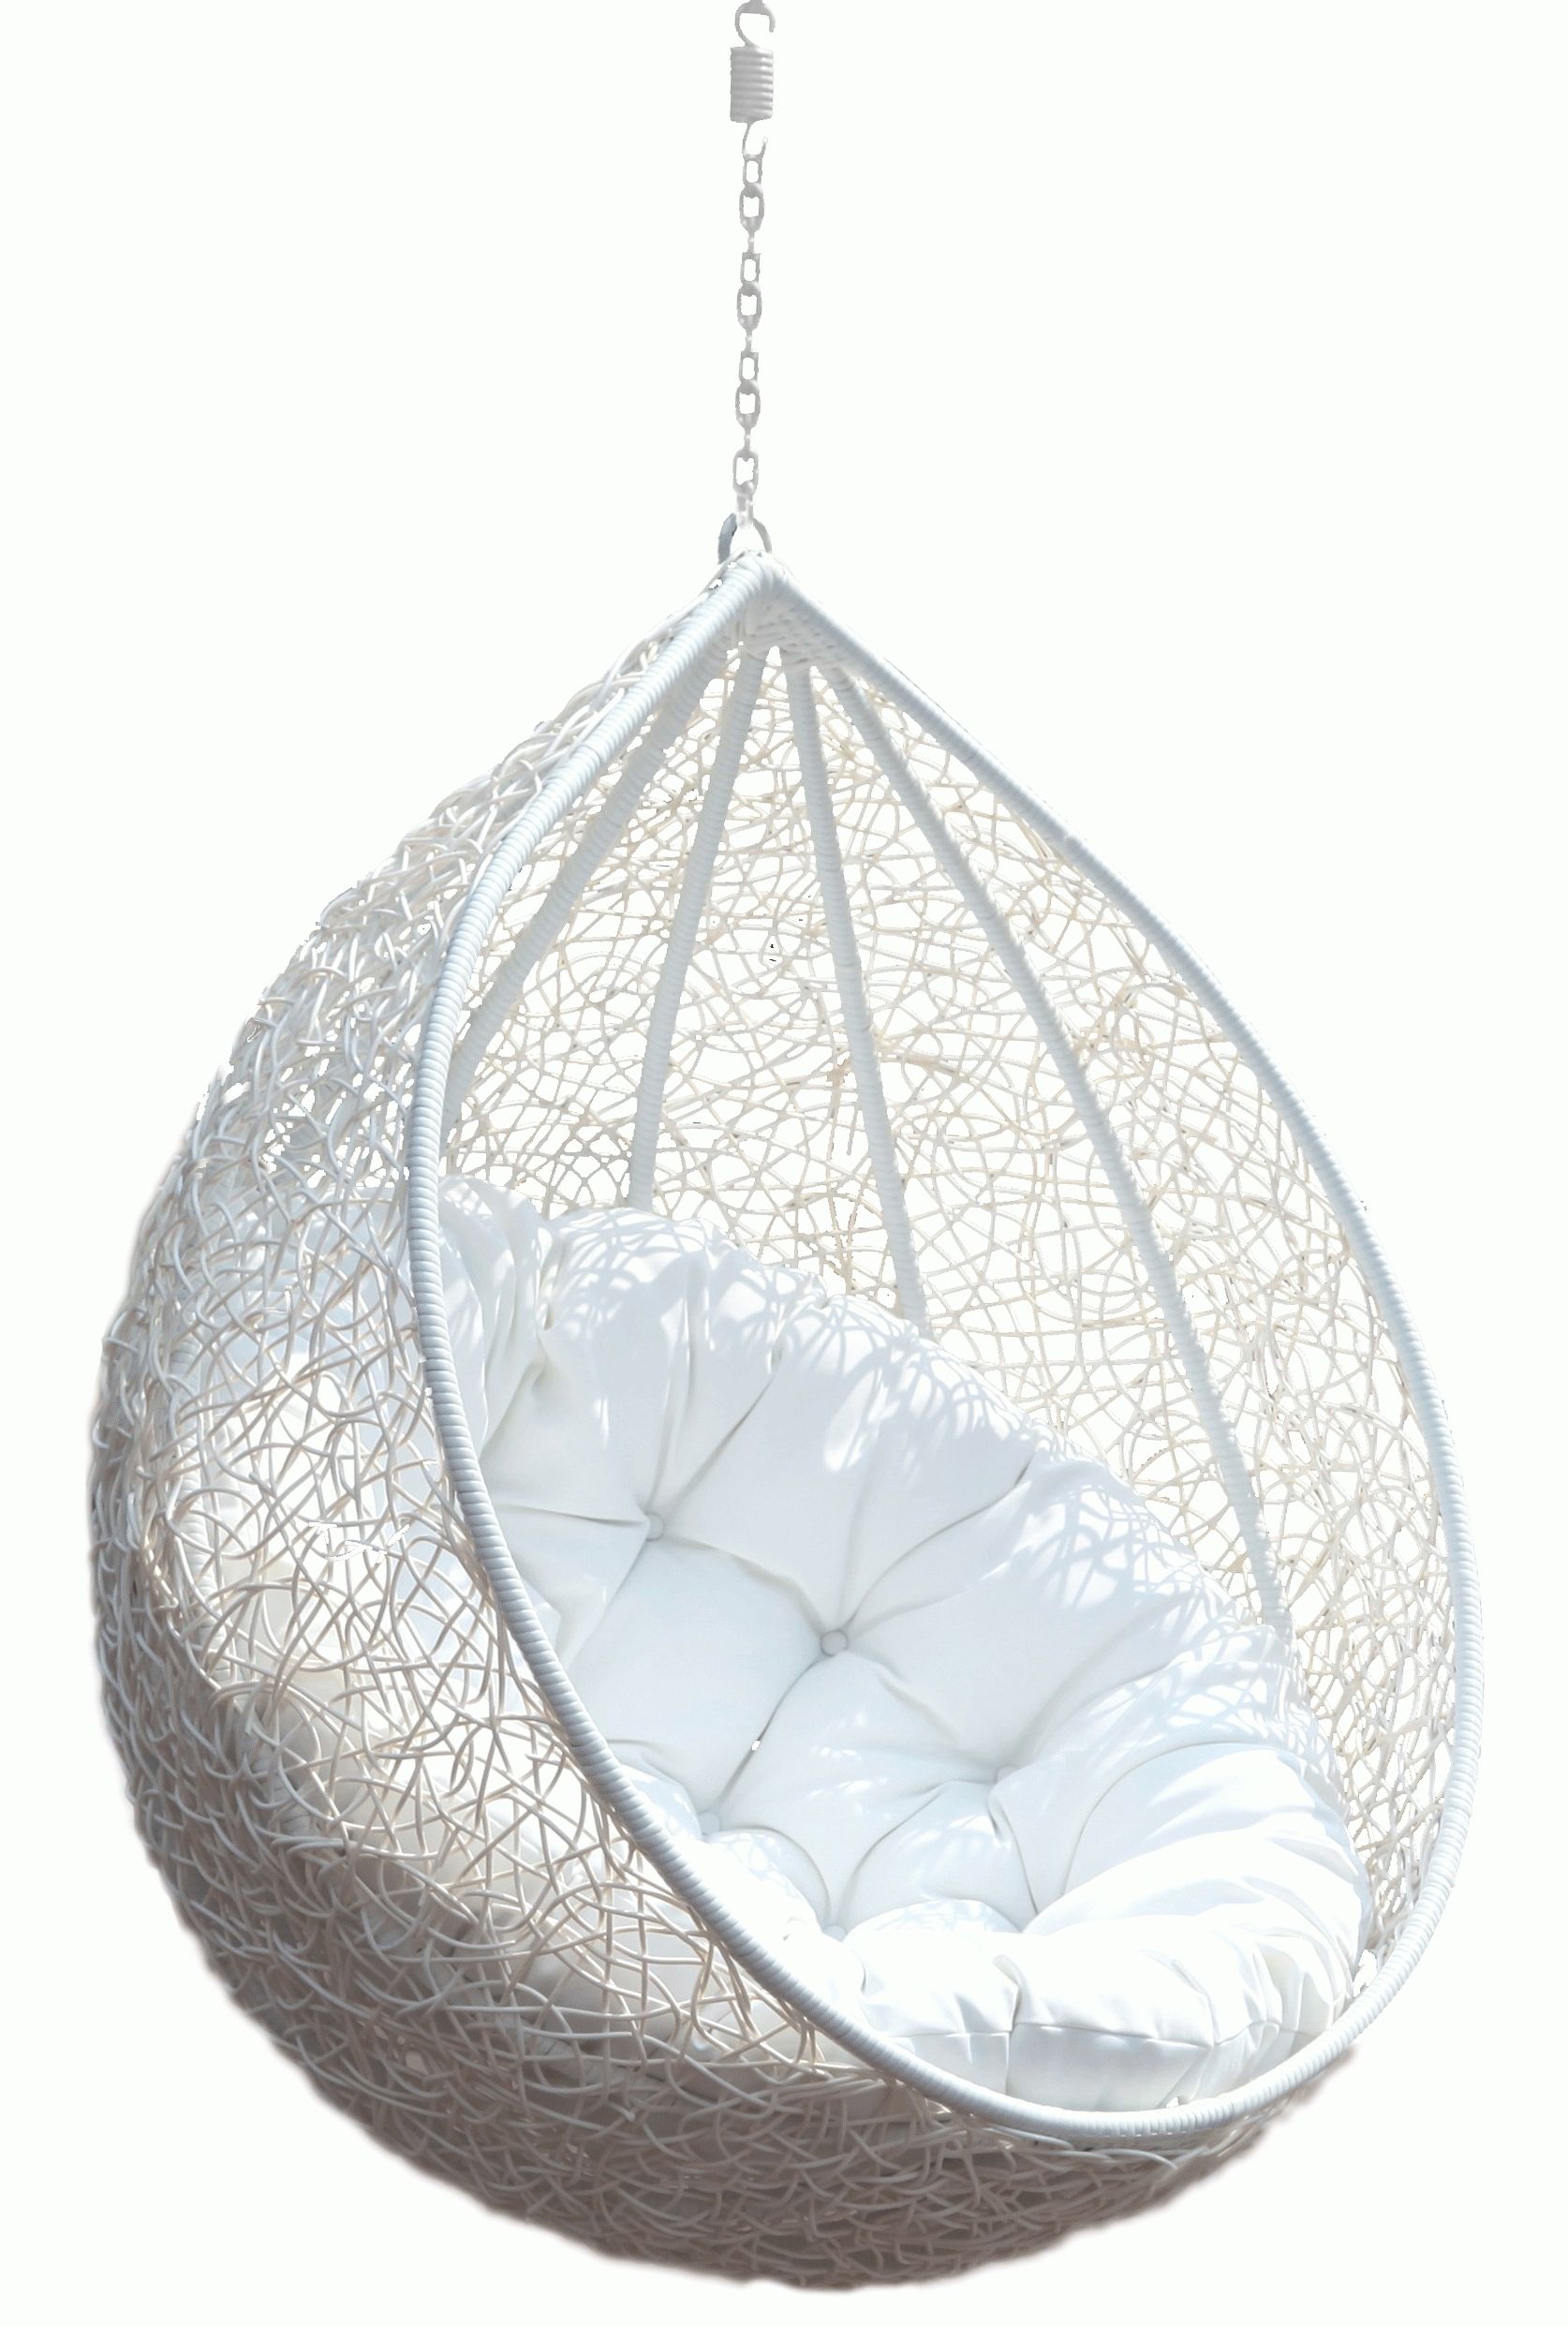 Hanging Chair Rattan Egg White Half Teardrop Wicker Hanging Chair Intended For Outdoor Hanging Wicker Lights (View 13 of 15)